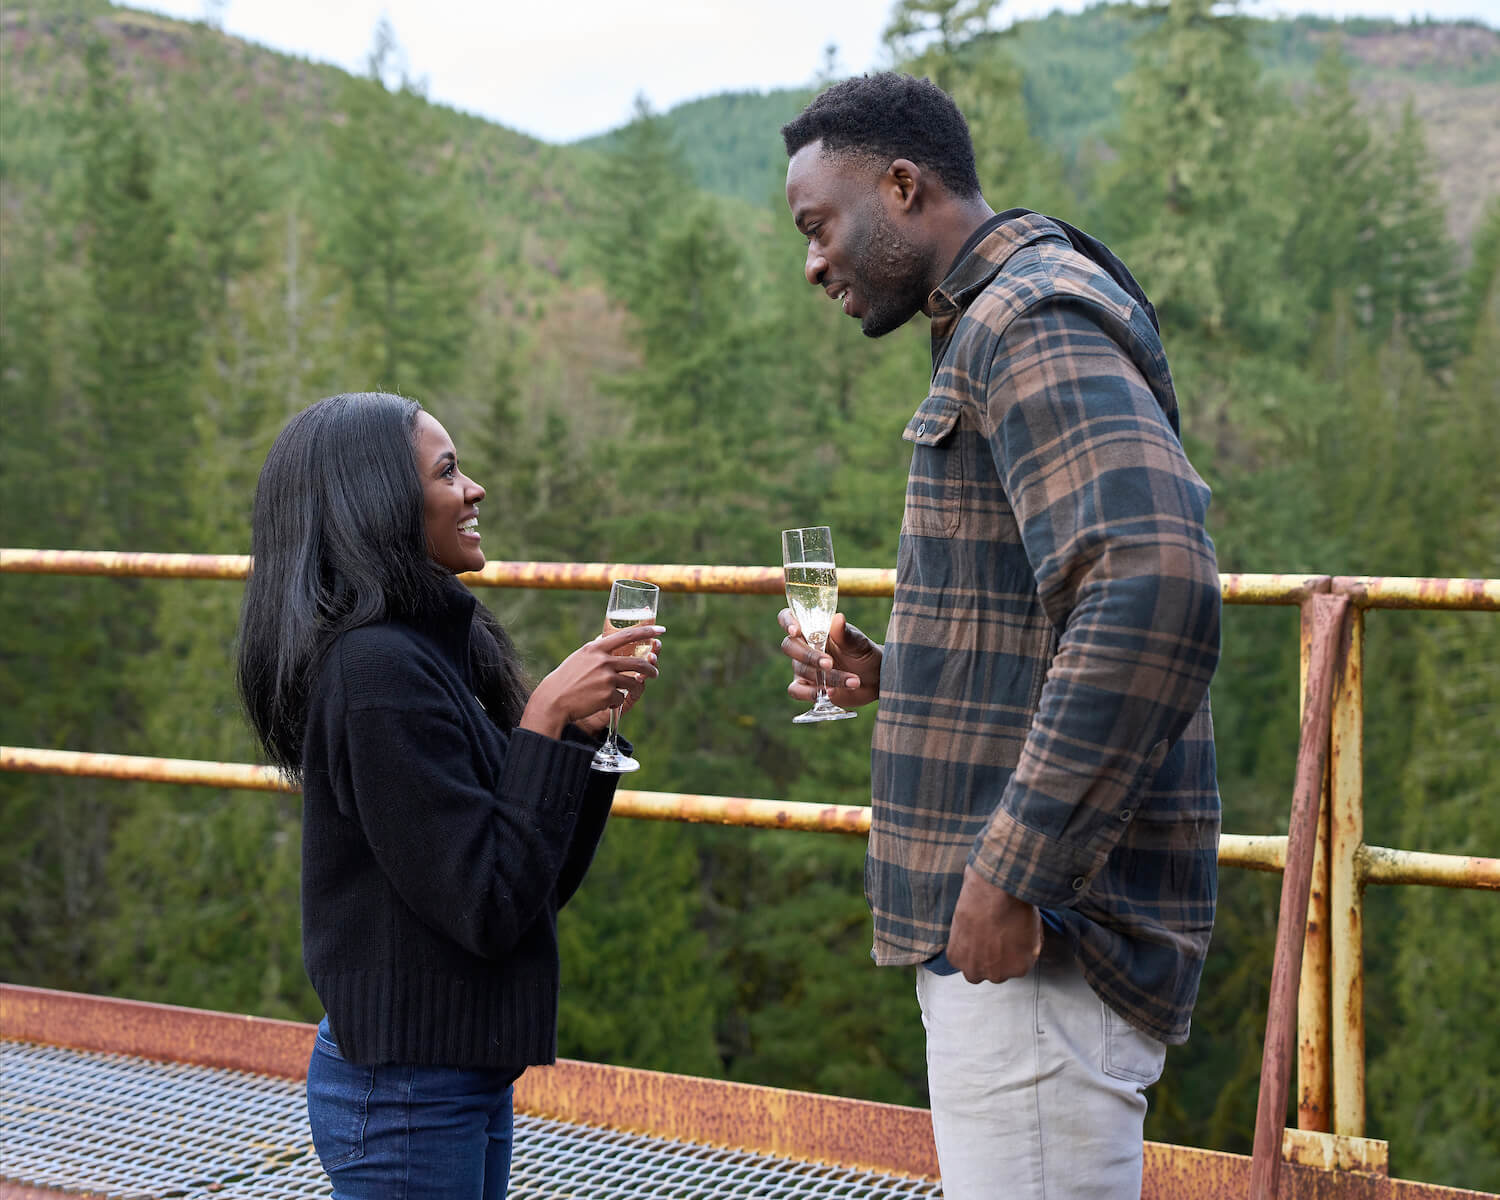 Charity Lawson speaking to Dotun Olubeko on their 1-on-1 date in 'The Bachelorette' 2023